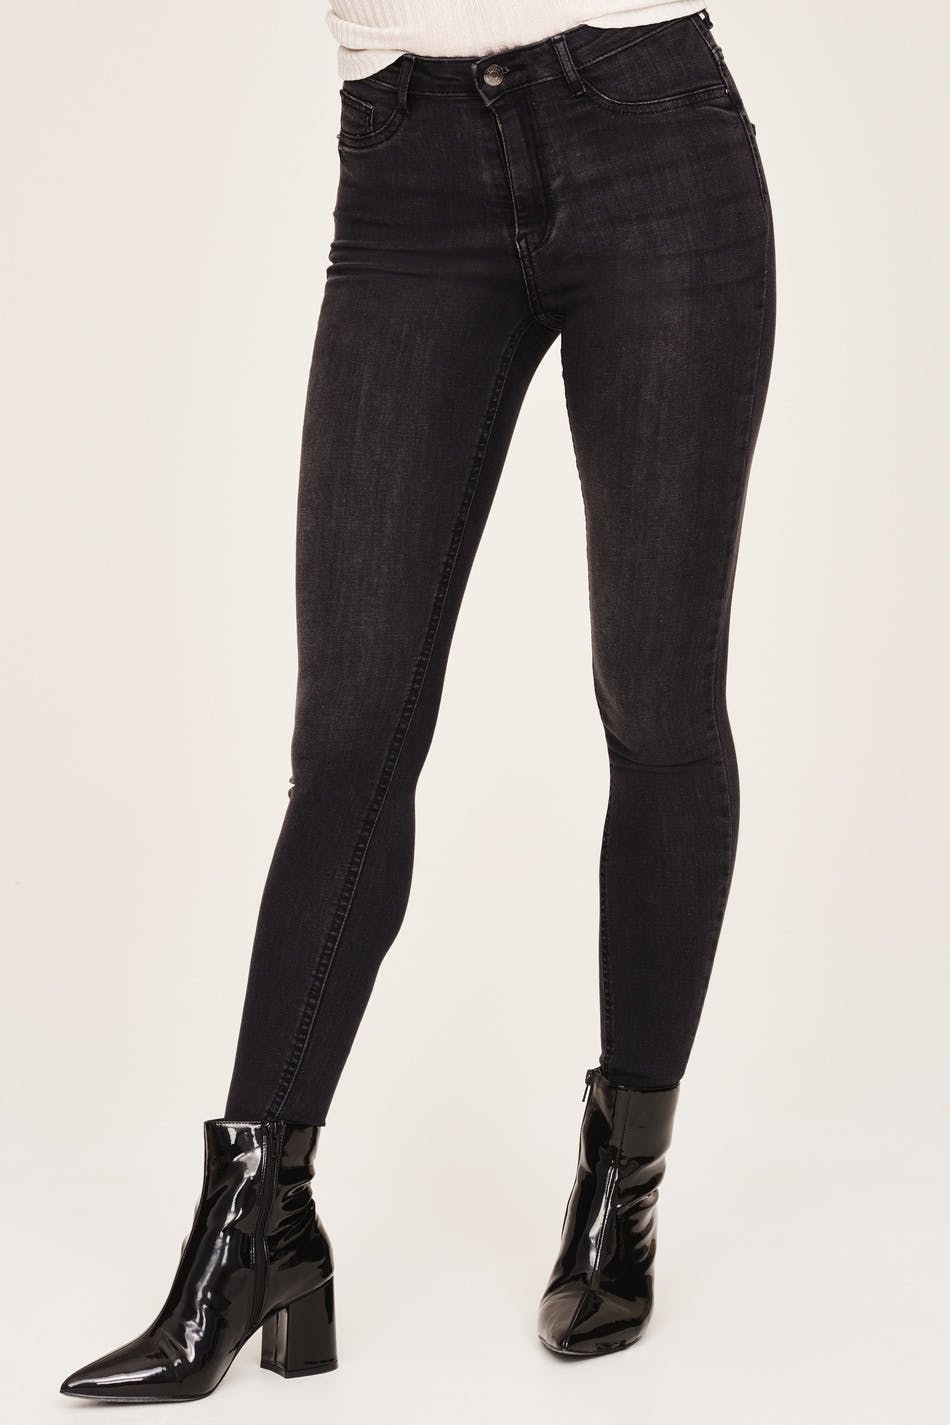 Tricot Molly Jeans Sort SAVE 40% - mpgc.net